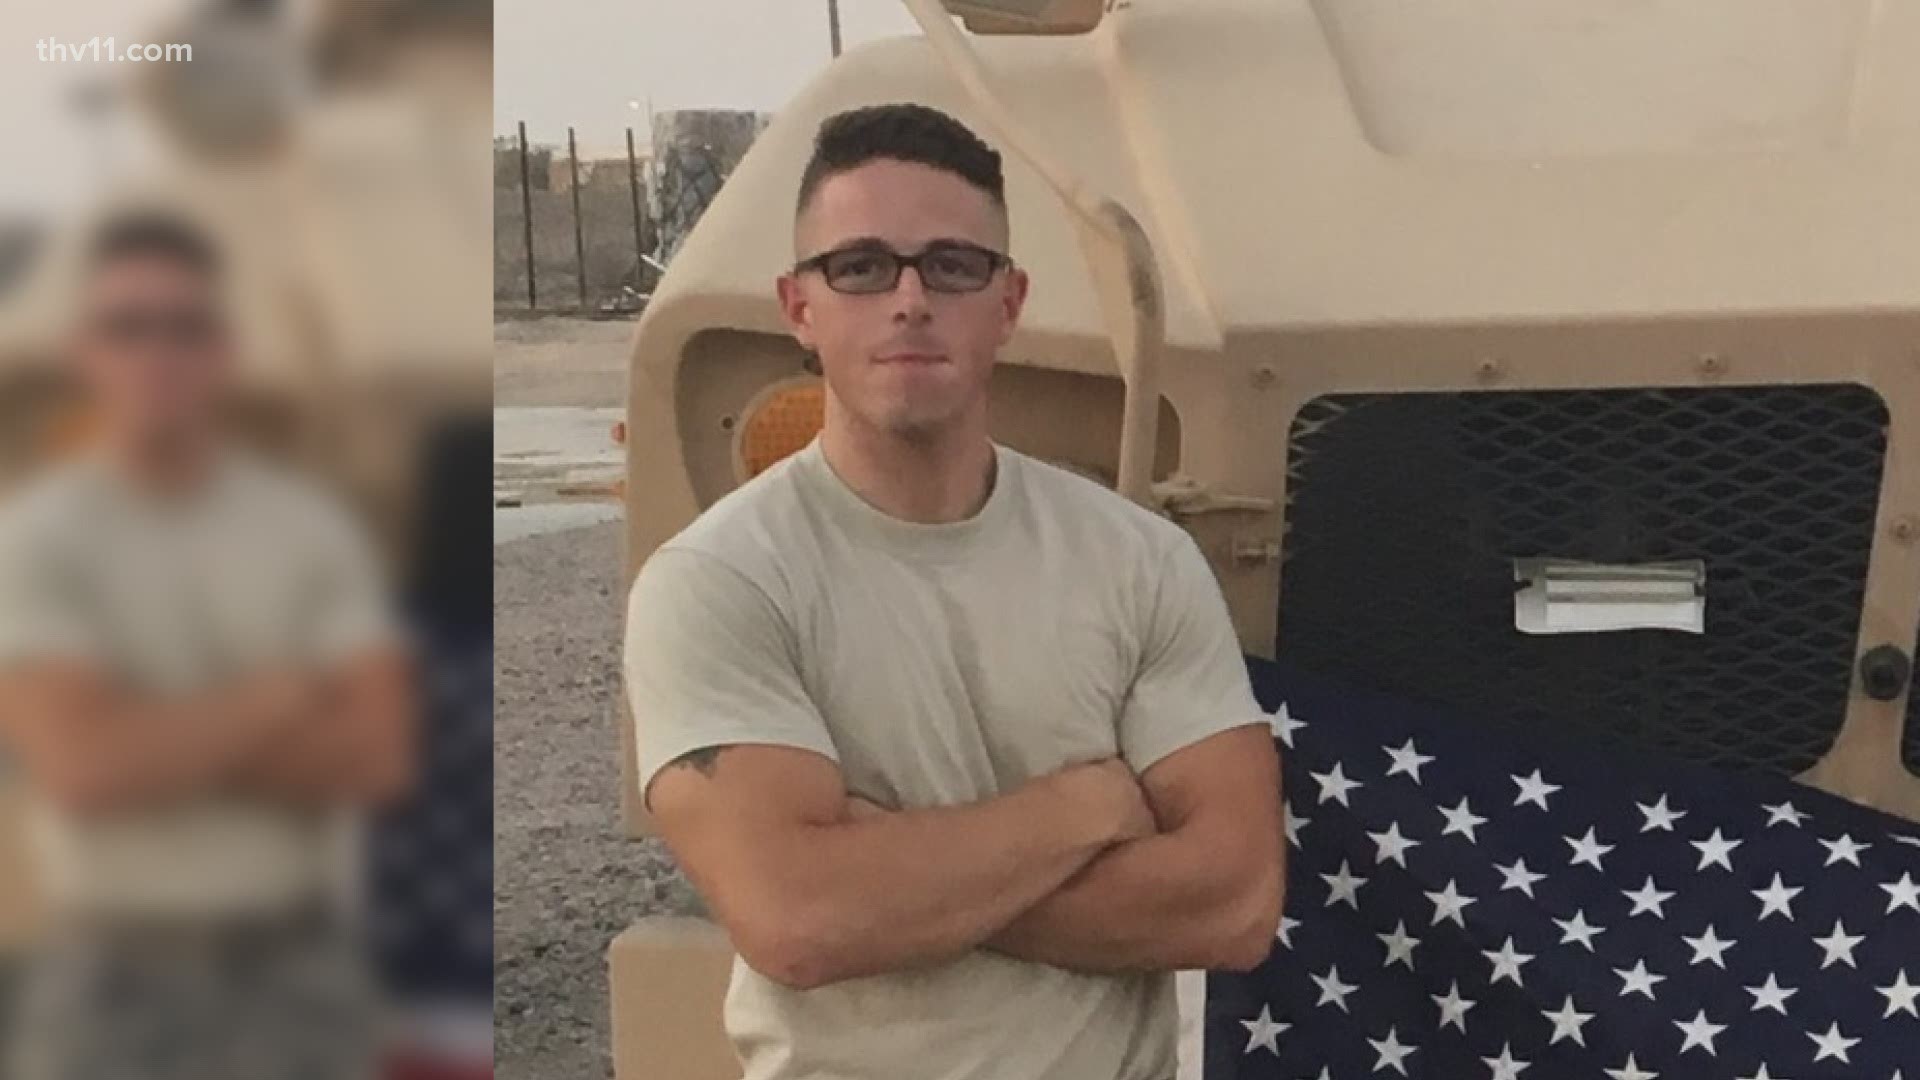 Senior Airman Shawn McKeough Jr's family has filed a wrongful death lawsuit against the gas station where he was shot and killed during a robbery.